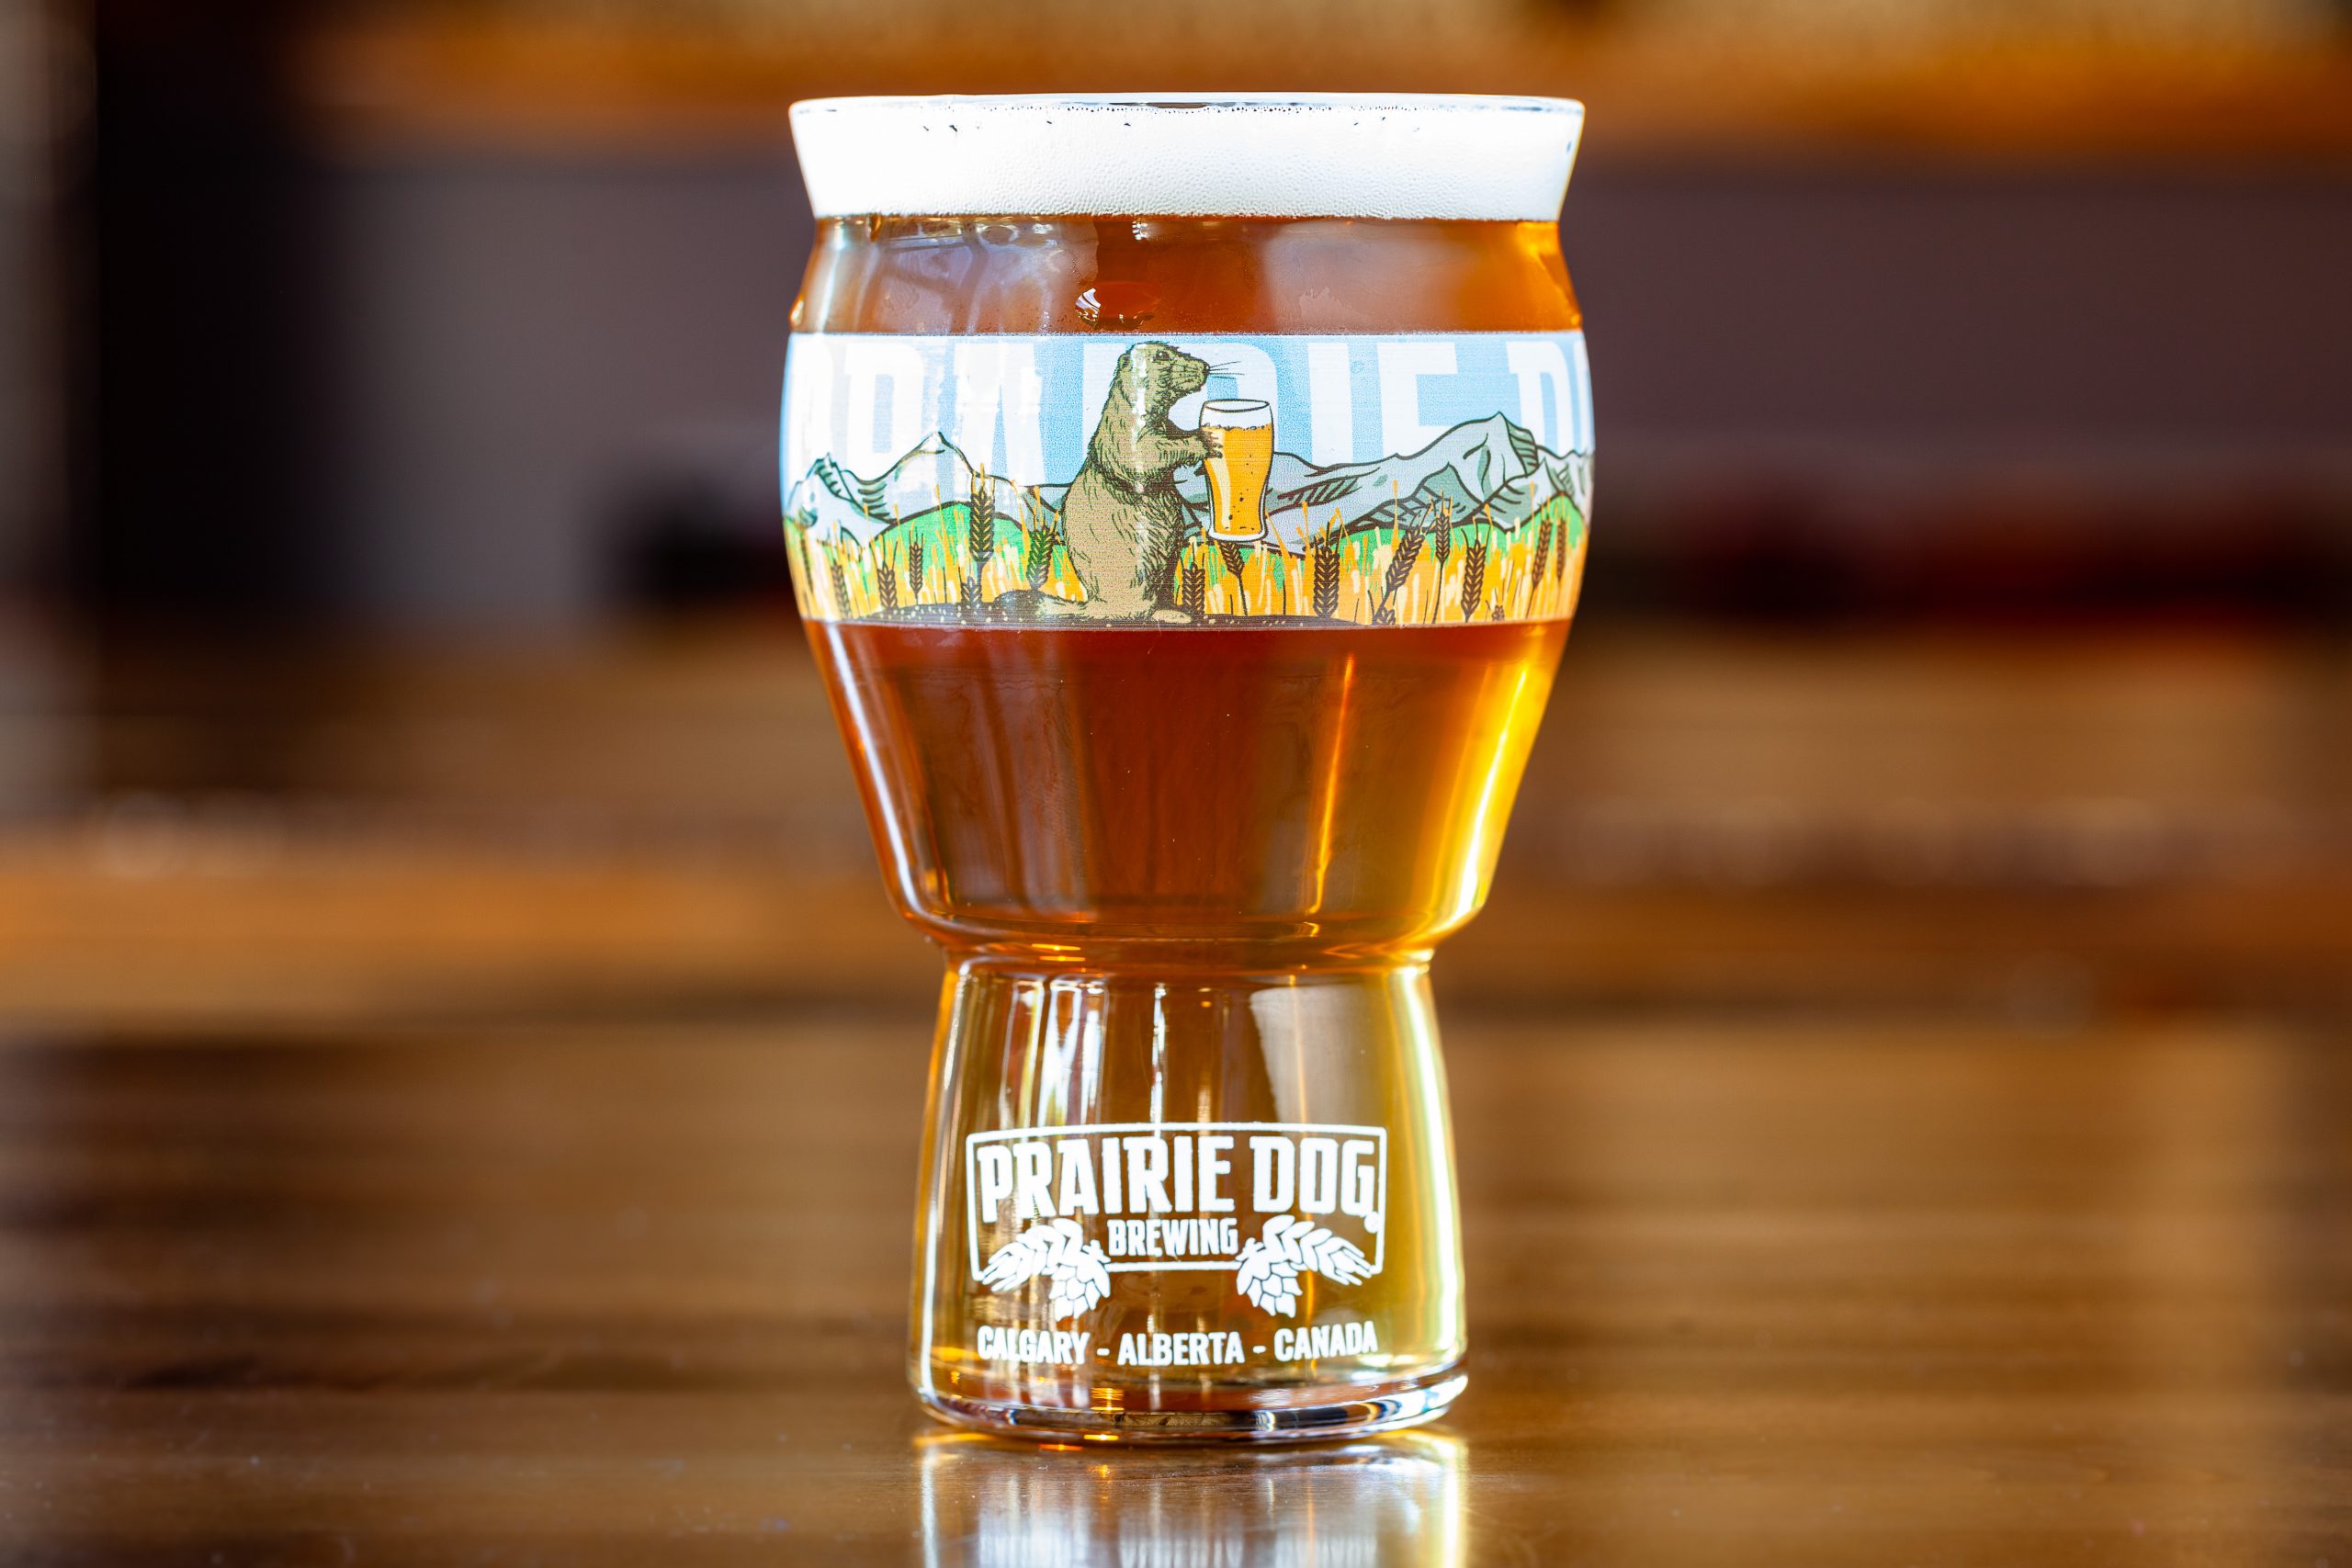 Prairie Dog Brewing's experimental Sunrise Prelude wild/sour saison in a branded 16-oz US pint glass.